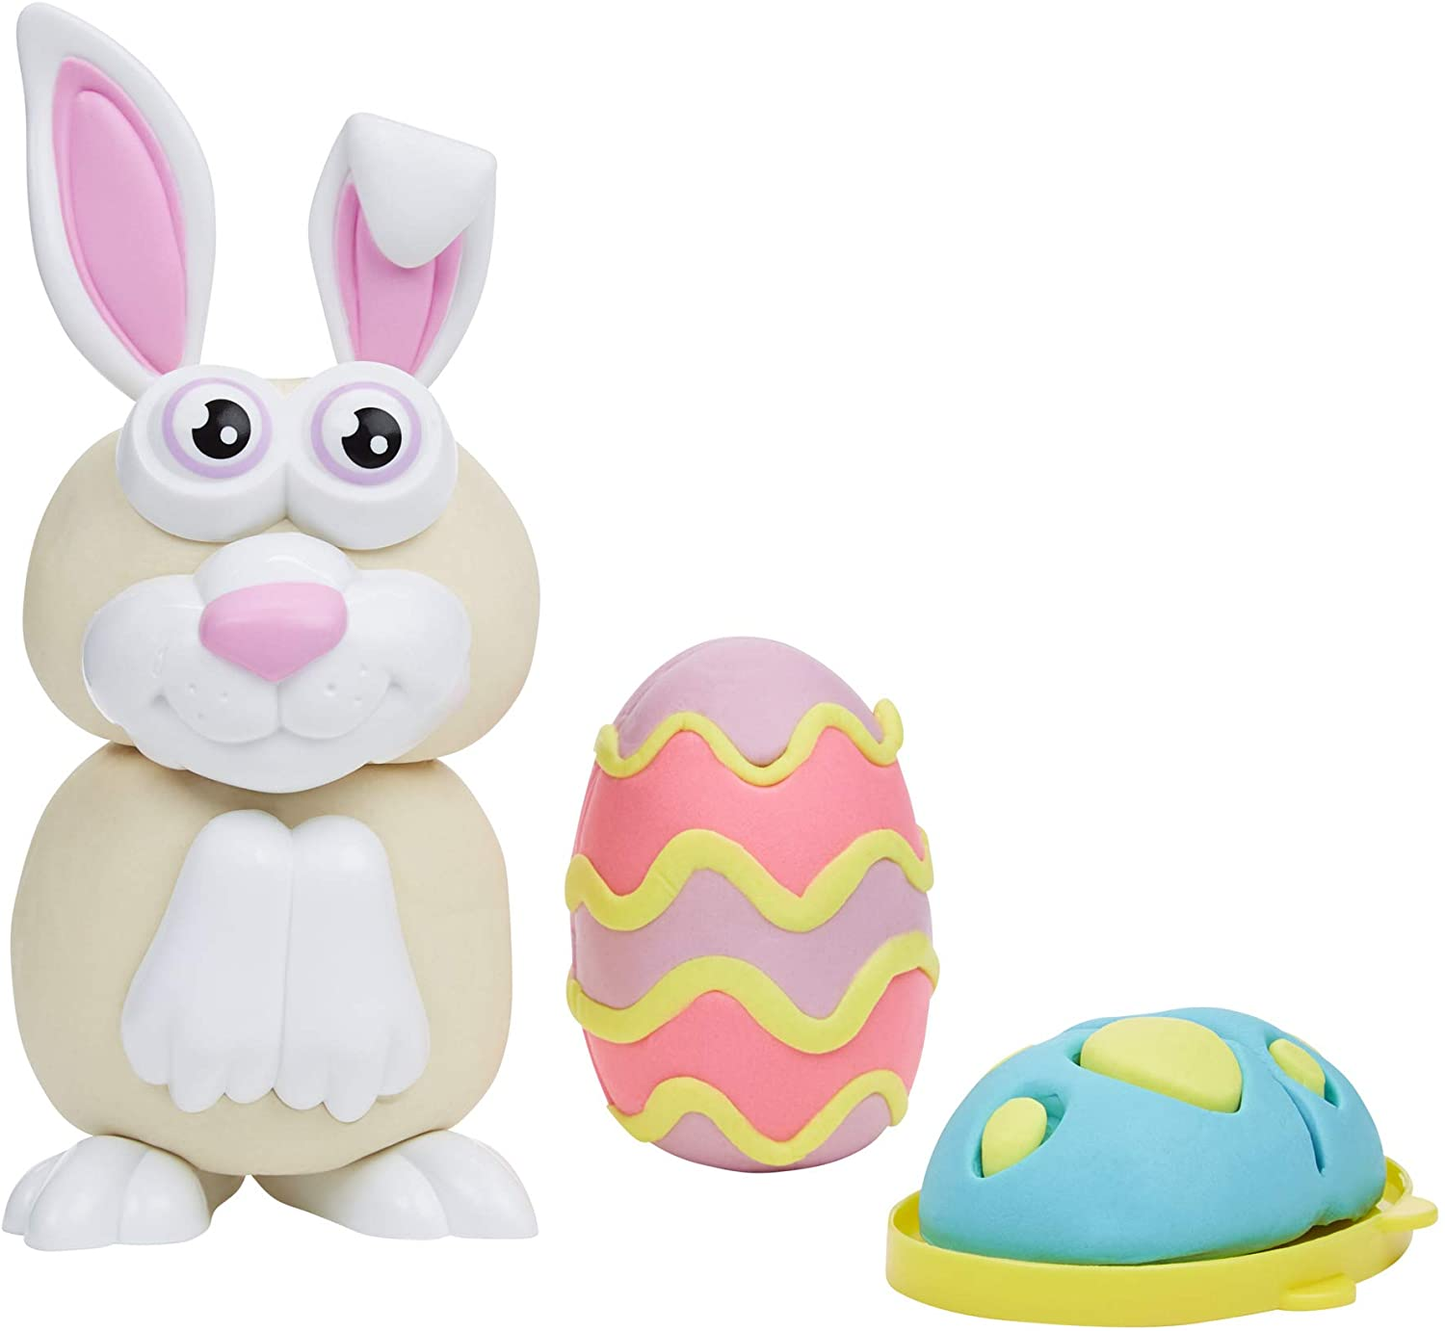 Play-Doh Easter Basket Toys 25-Piece Bundle, Make Your Own Easter Bunny Kit with Easter Eggs, Stampers, and 10 Cans of Play-Doh, Bunny Toys for Kids, 2-Ounce Cans (Amazon Exclusive)